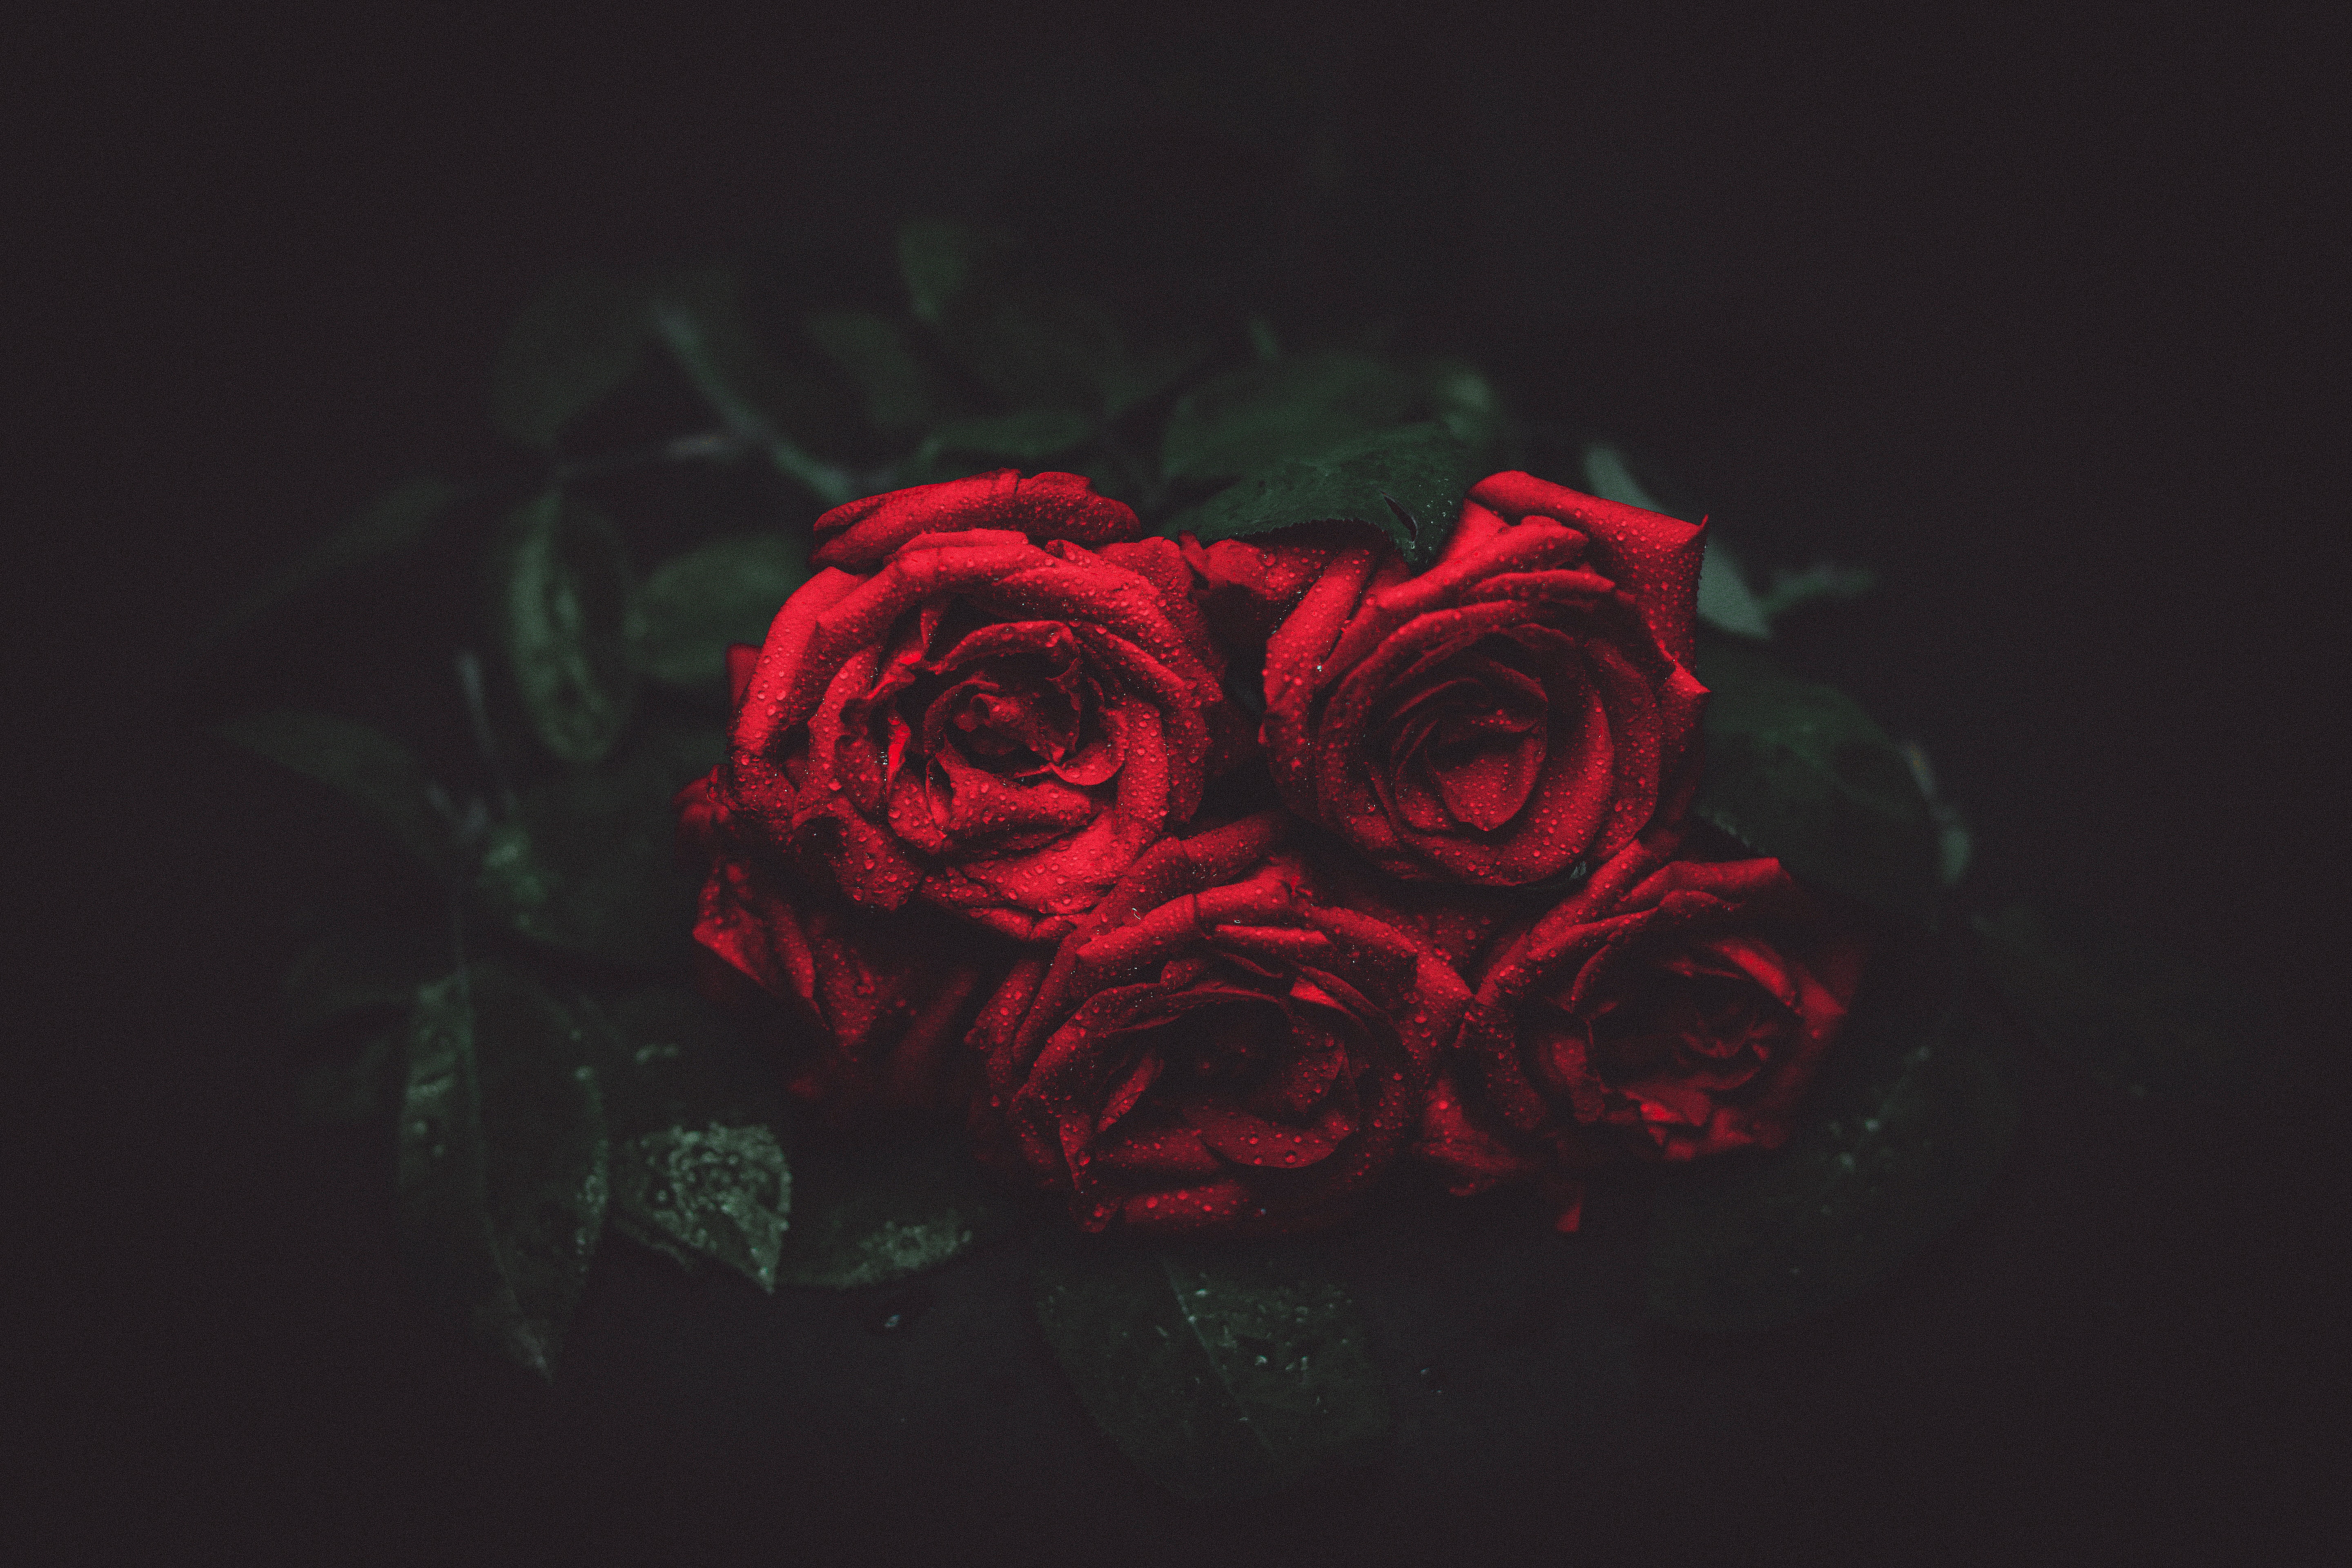 57050 download wallpaper dark, roses, drops, dark background, buds screensavers and pictures for free